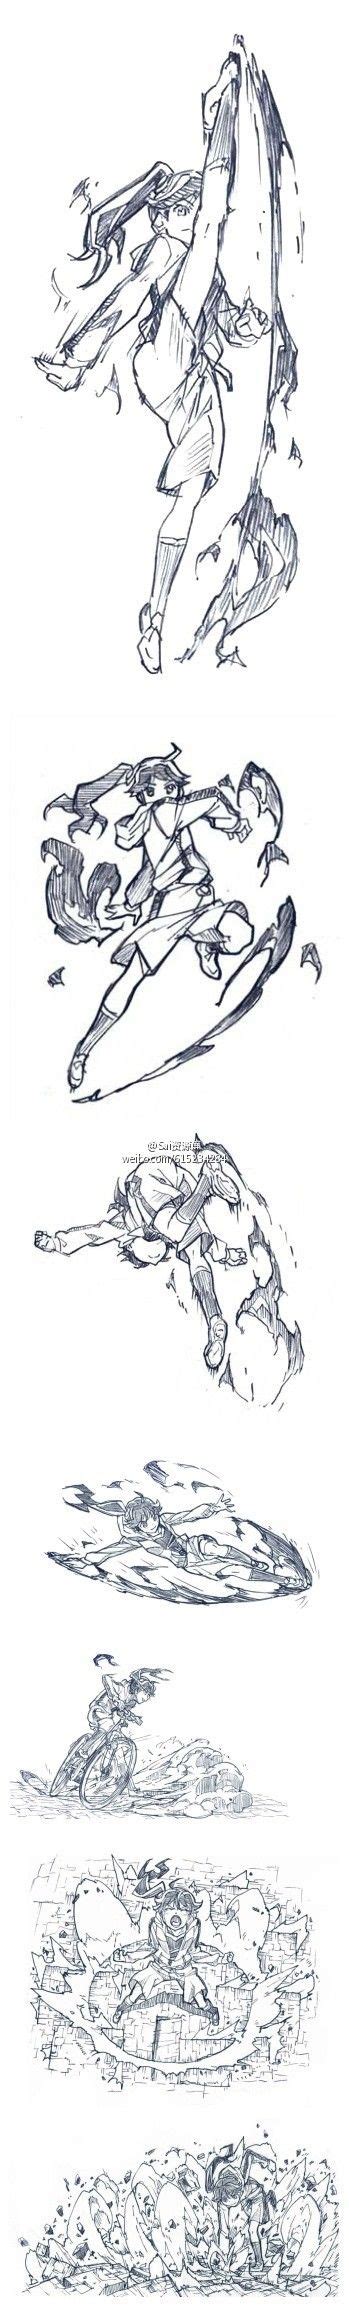 battle poses images  pinterest action poses character design  manga drawing